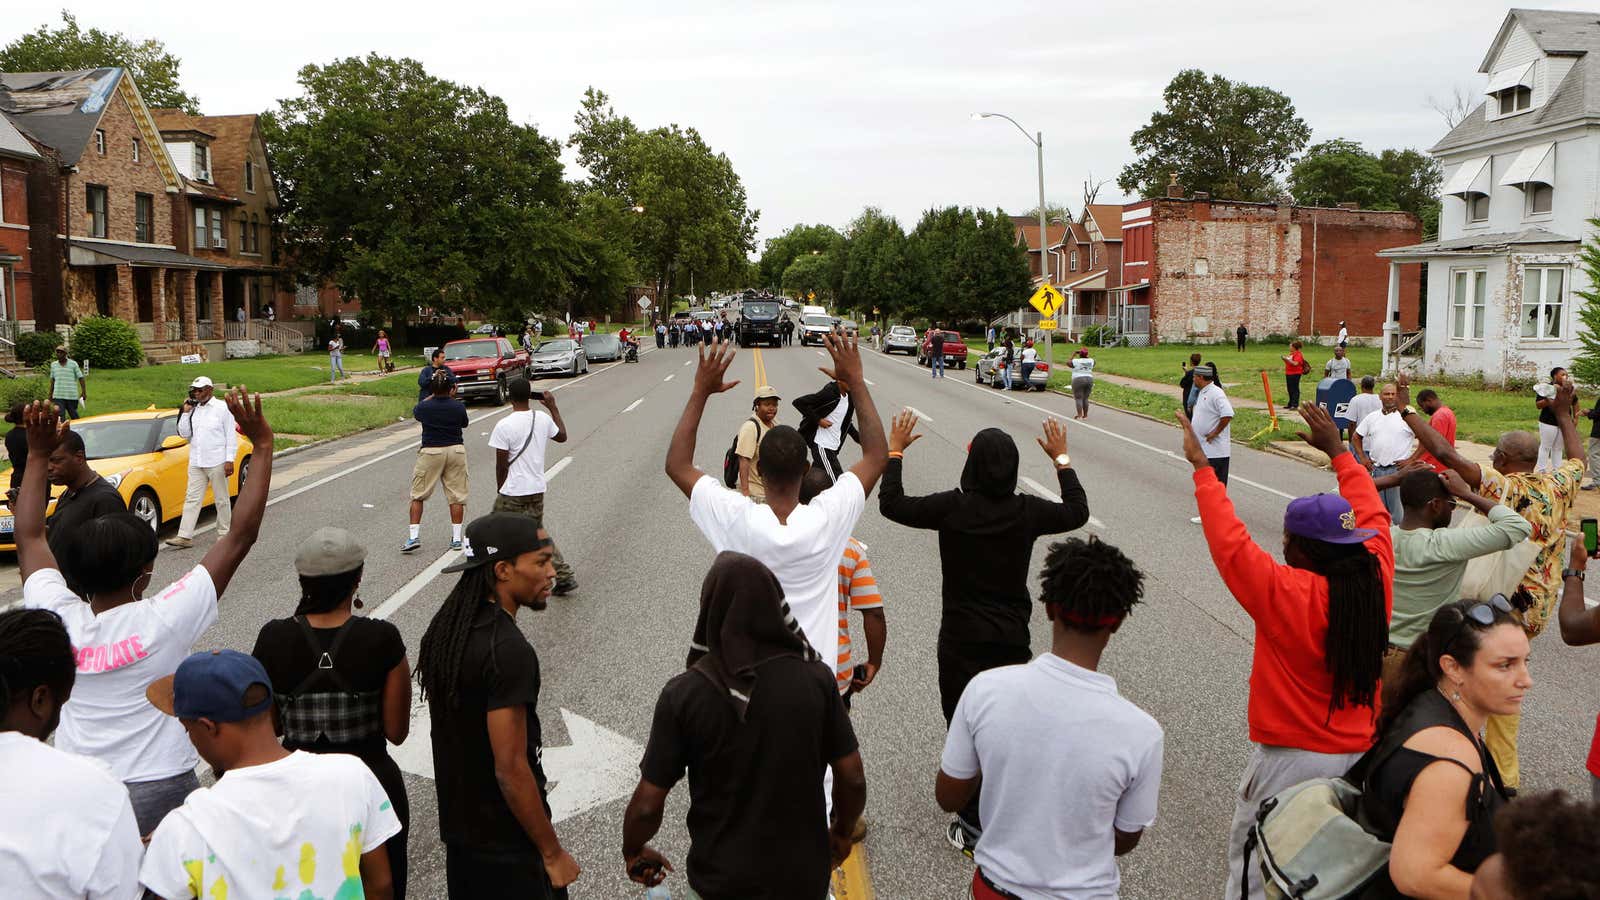 Racial strife is still alive in St. Louis, Missouri.